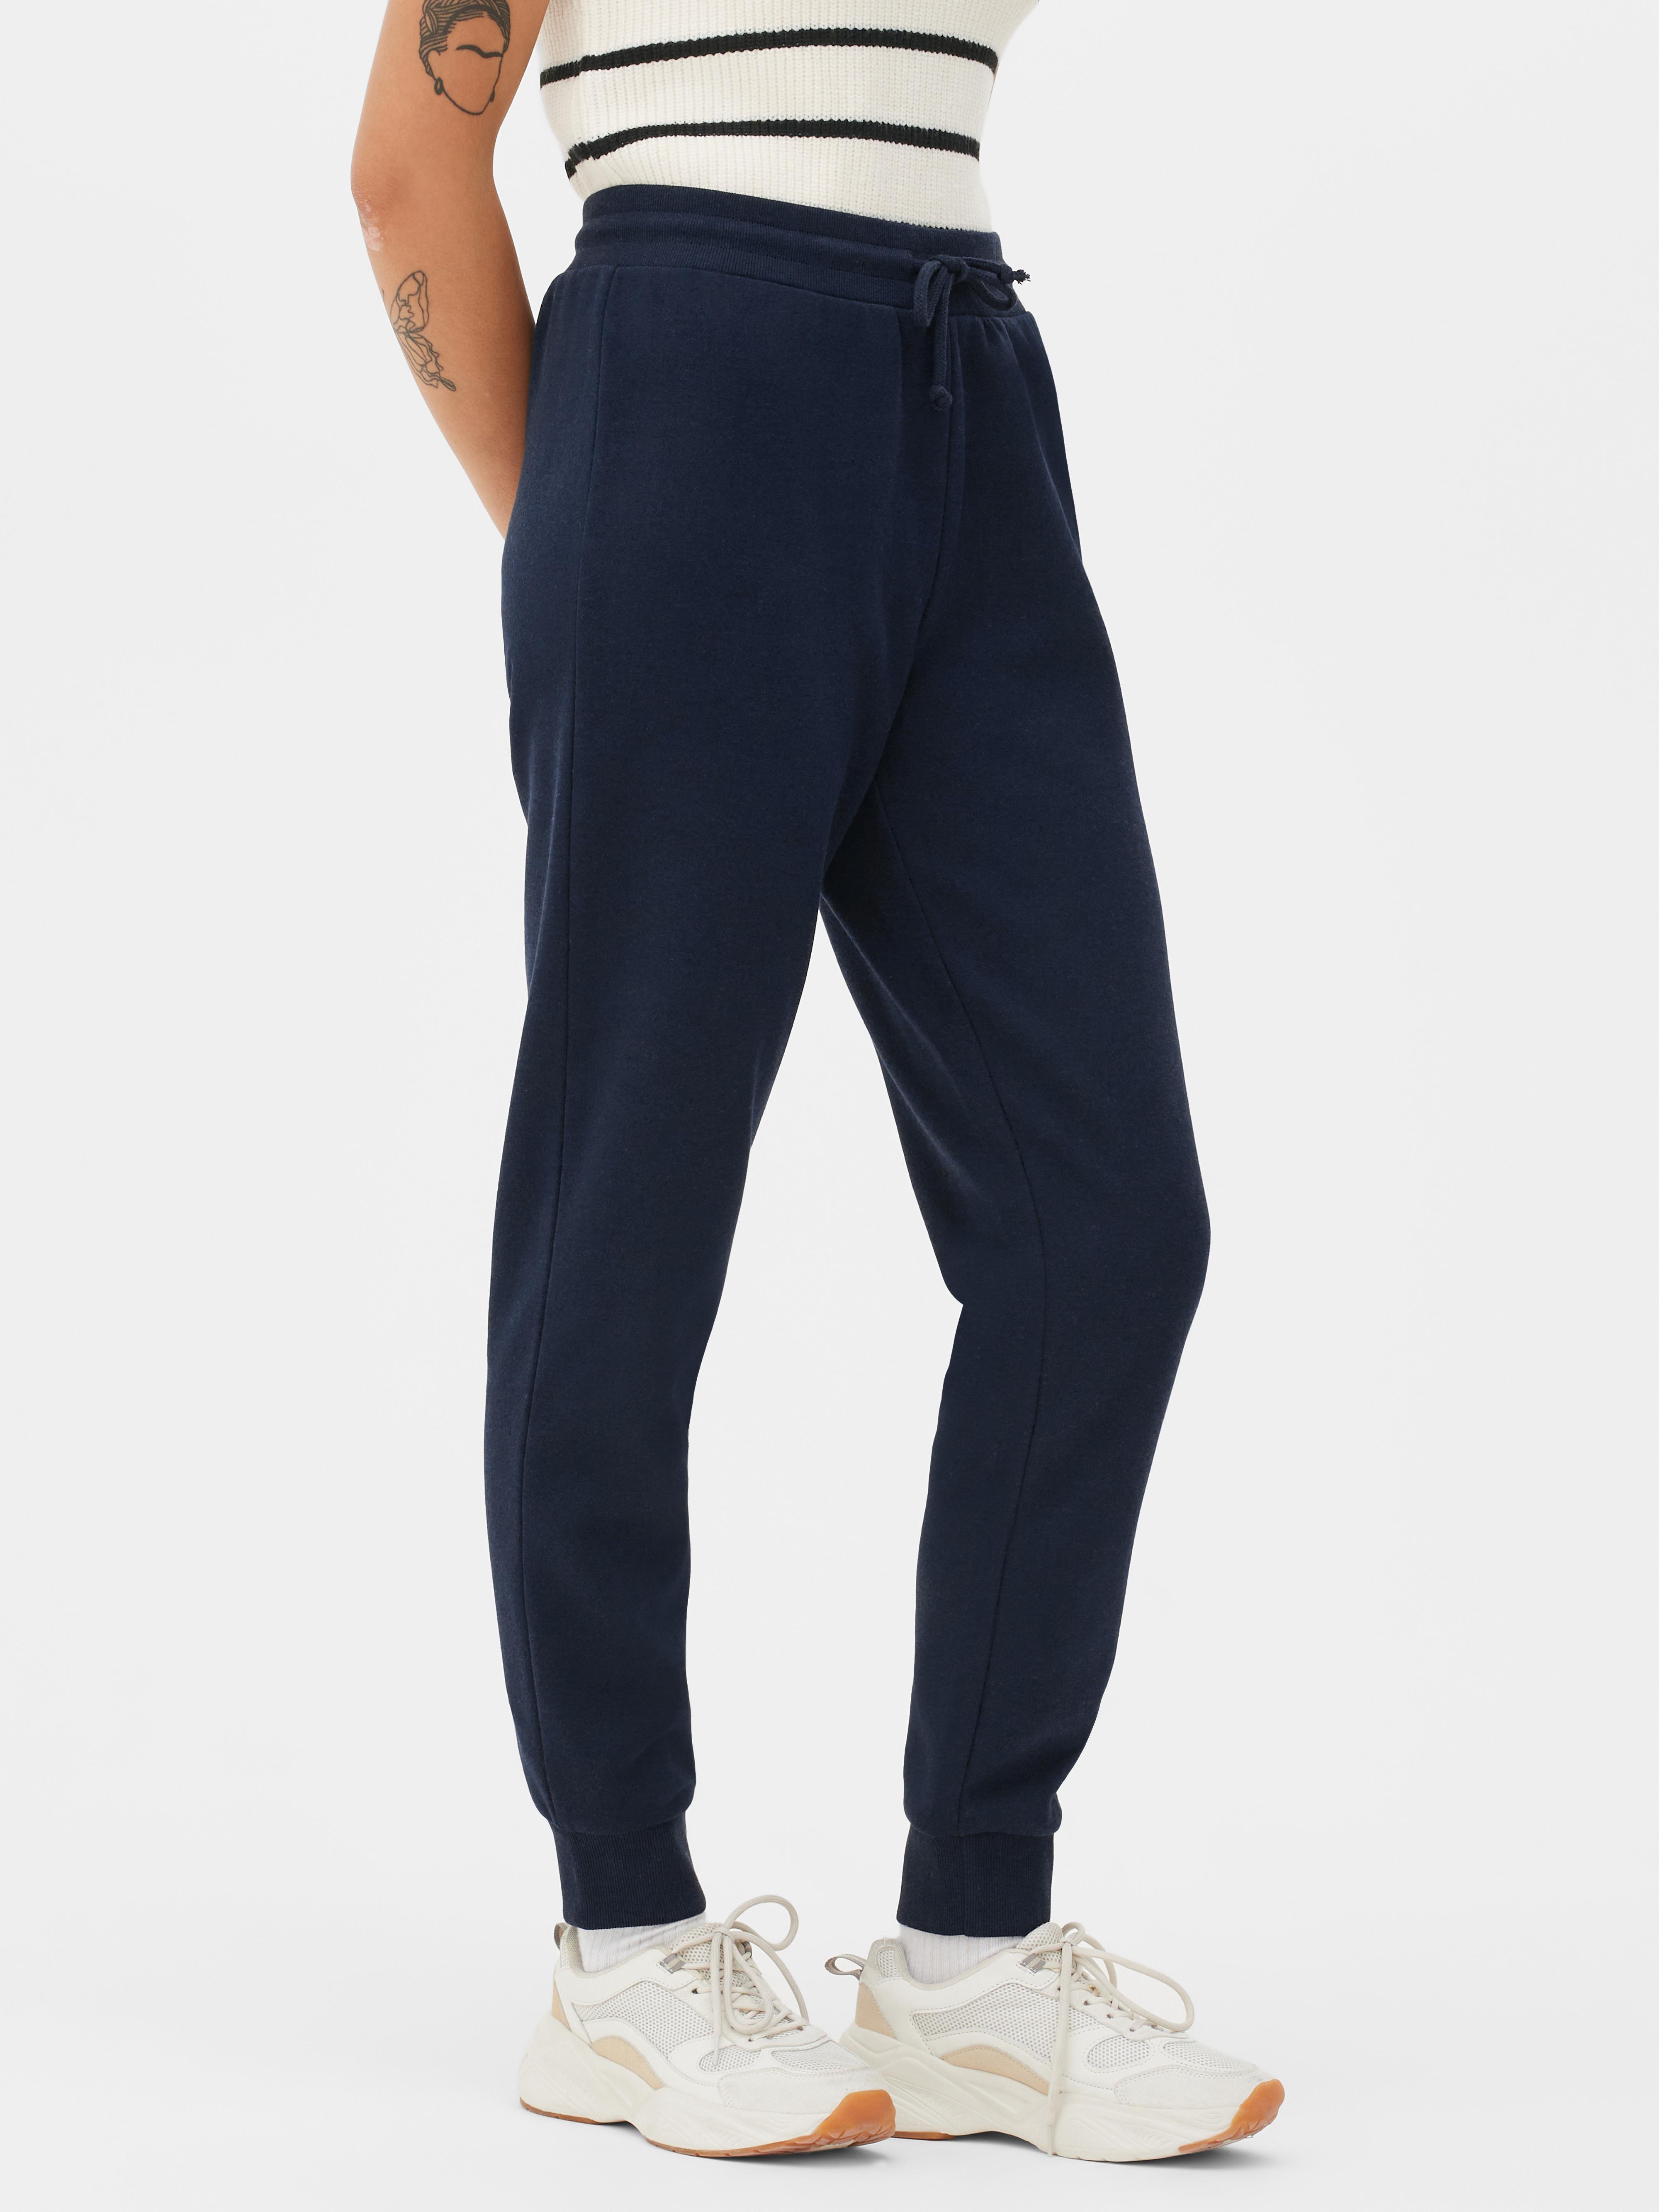 Womens Navy Skinny Fit Joggers